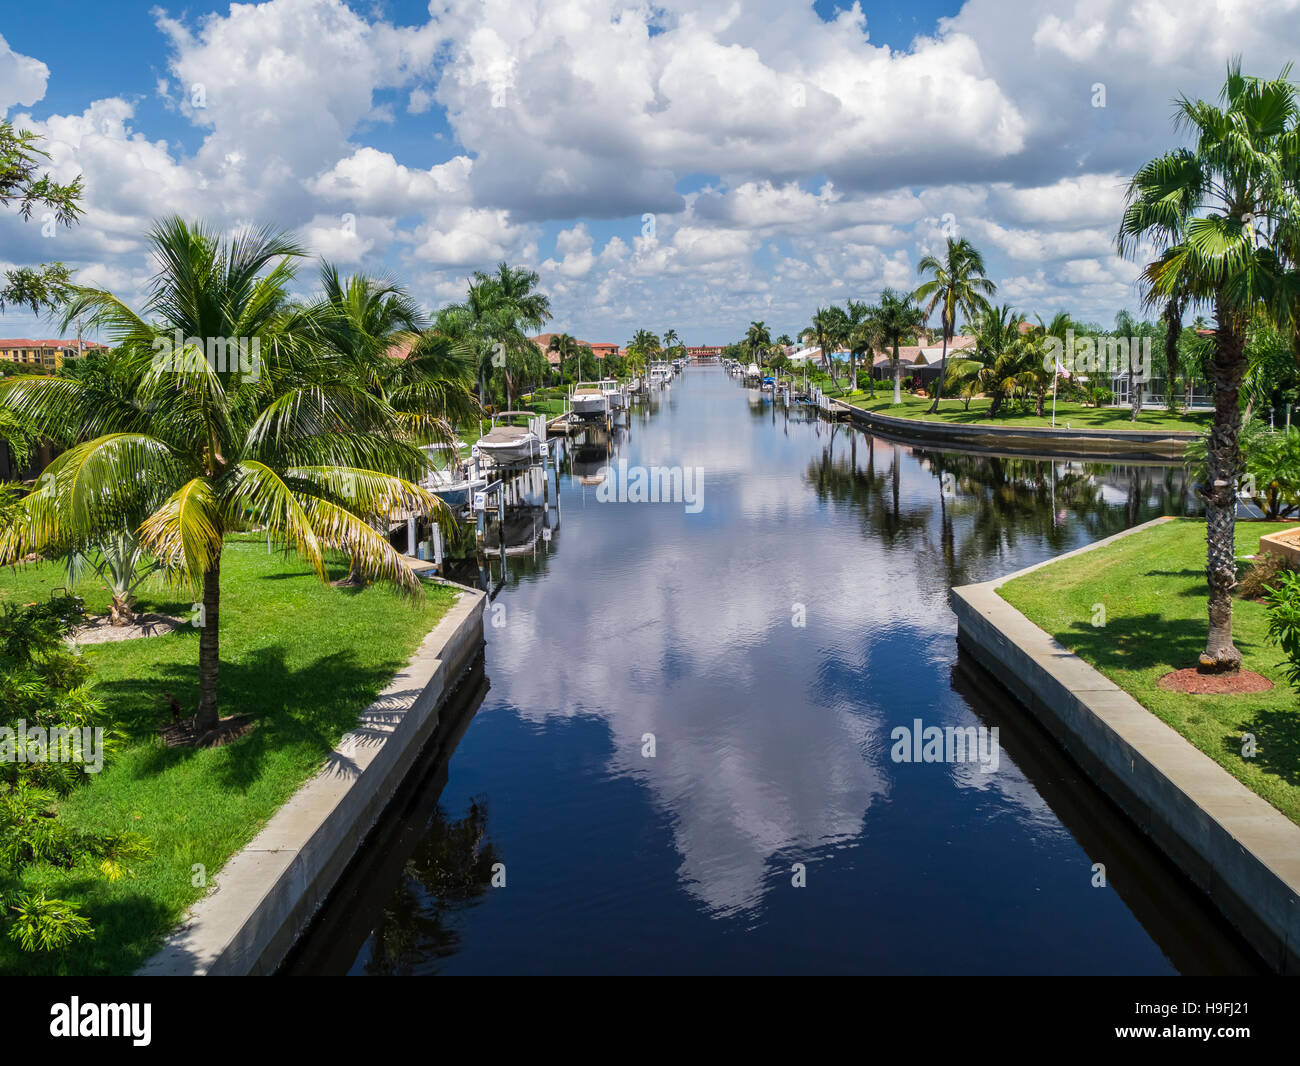 Boats on canals in residential neighborhood of Punta Gorda on the Gulf Coast of Florida Stock Photo